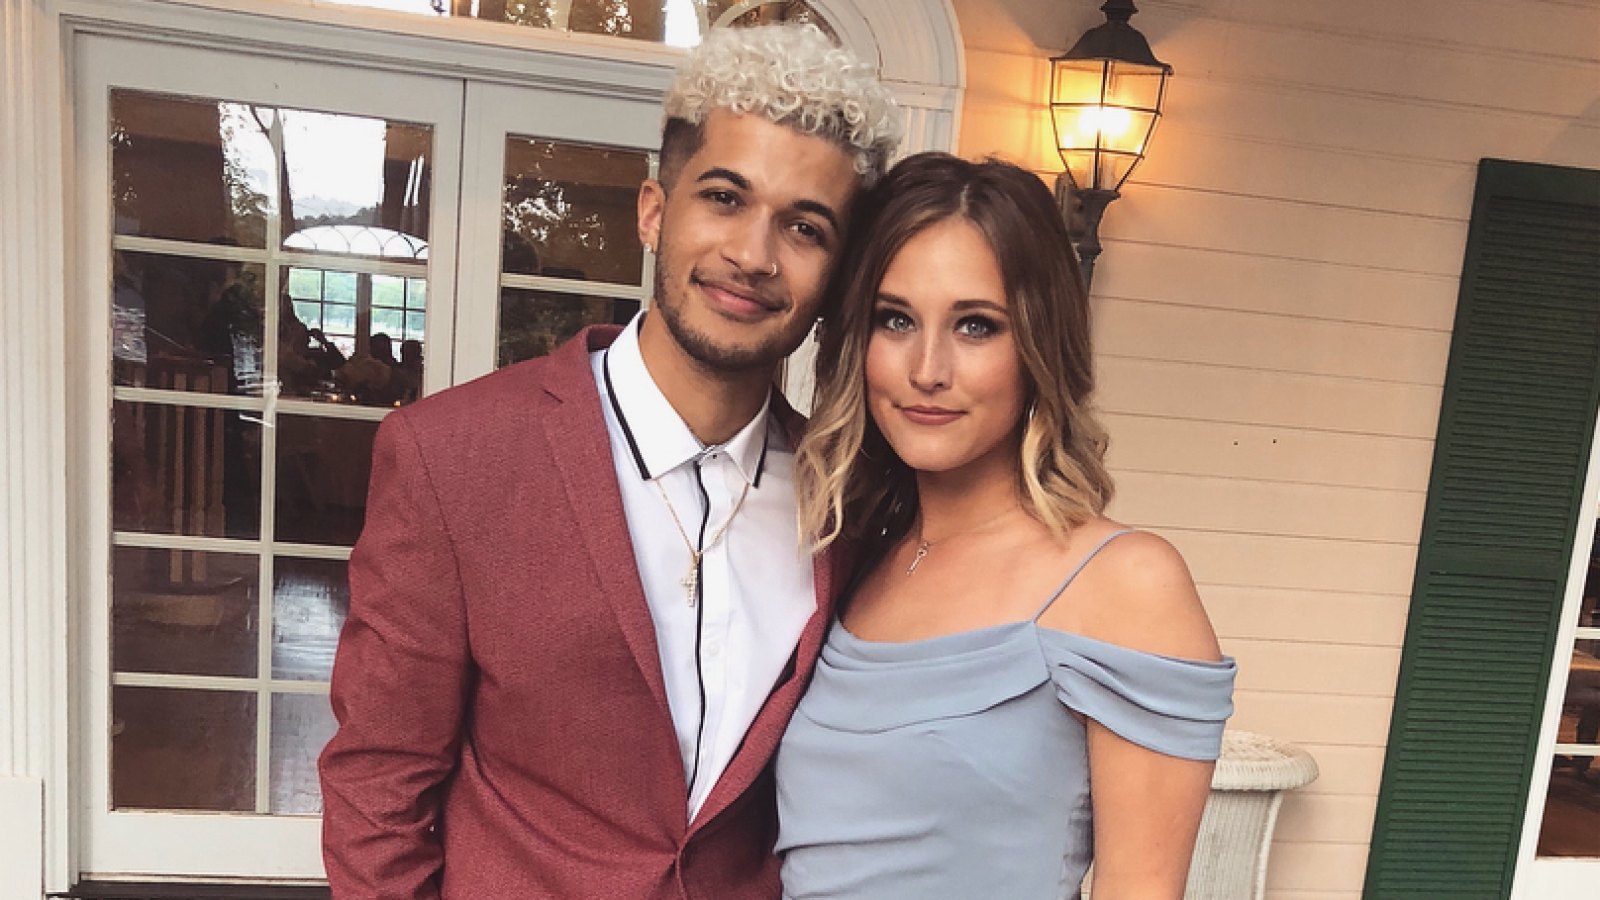 Dancing With the Stars’ Jordan Fisher Is Engaged to Longtime Love Ellie Woods